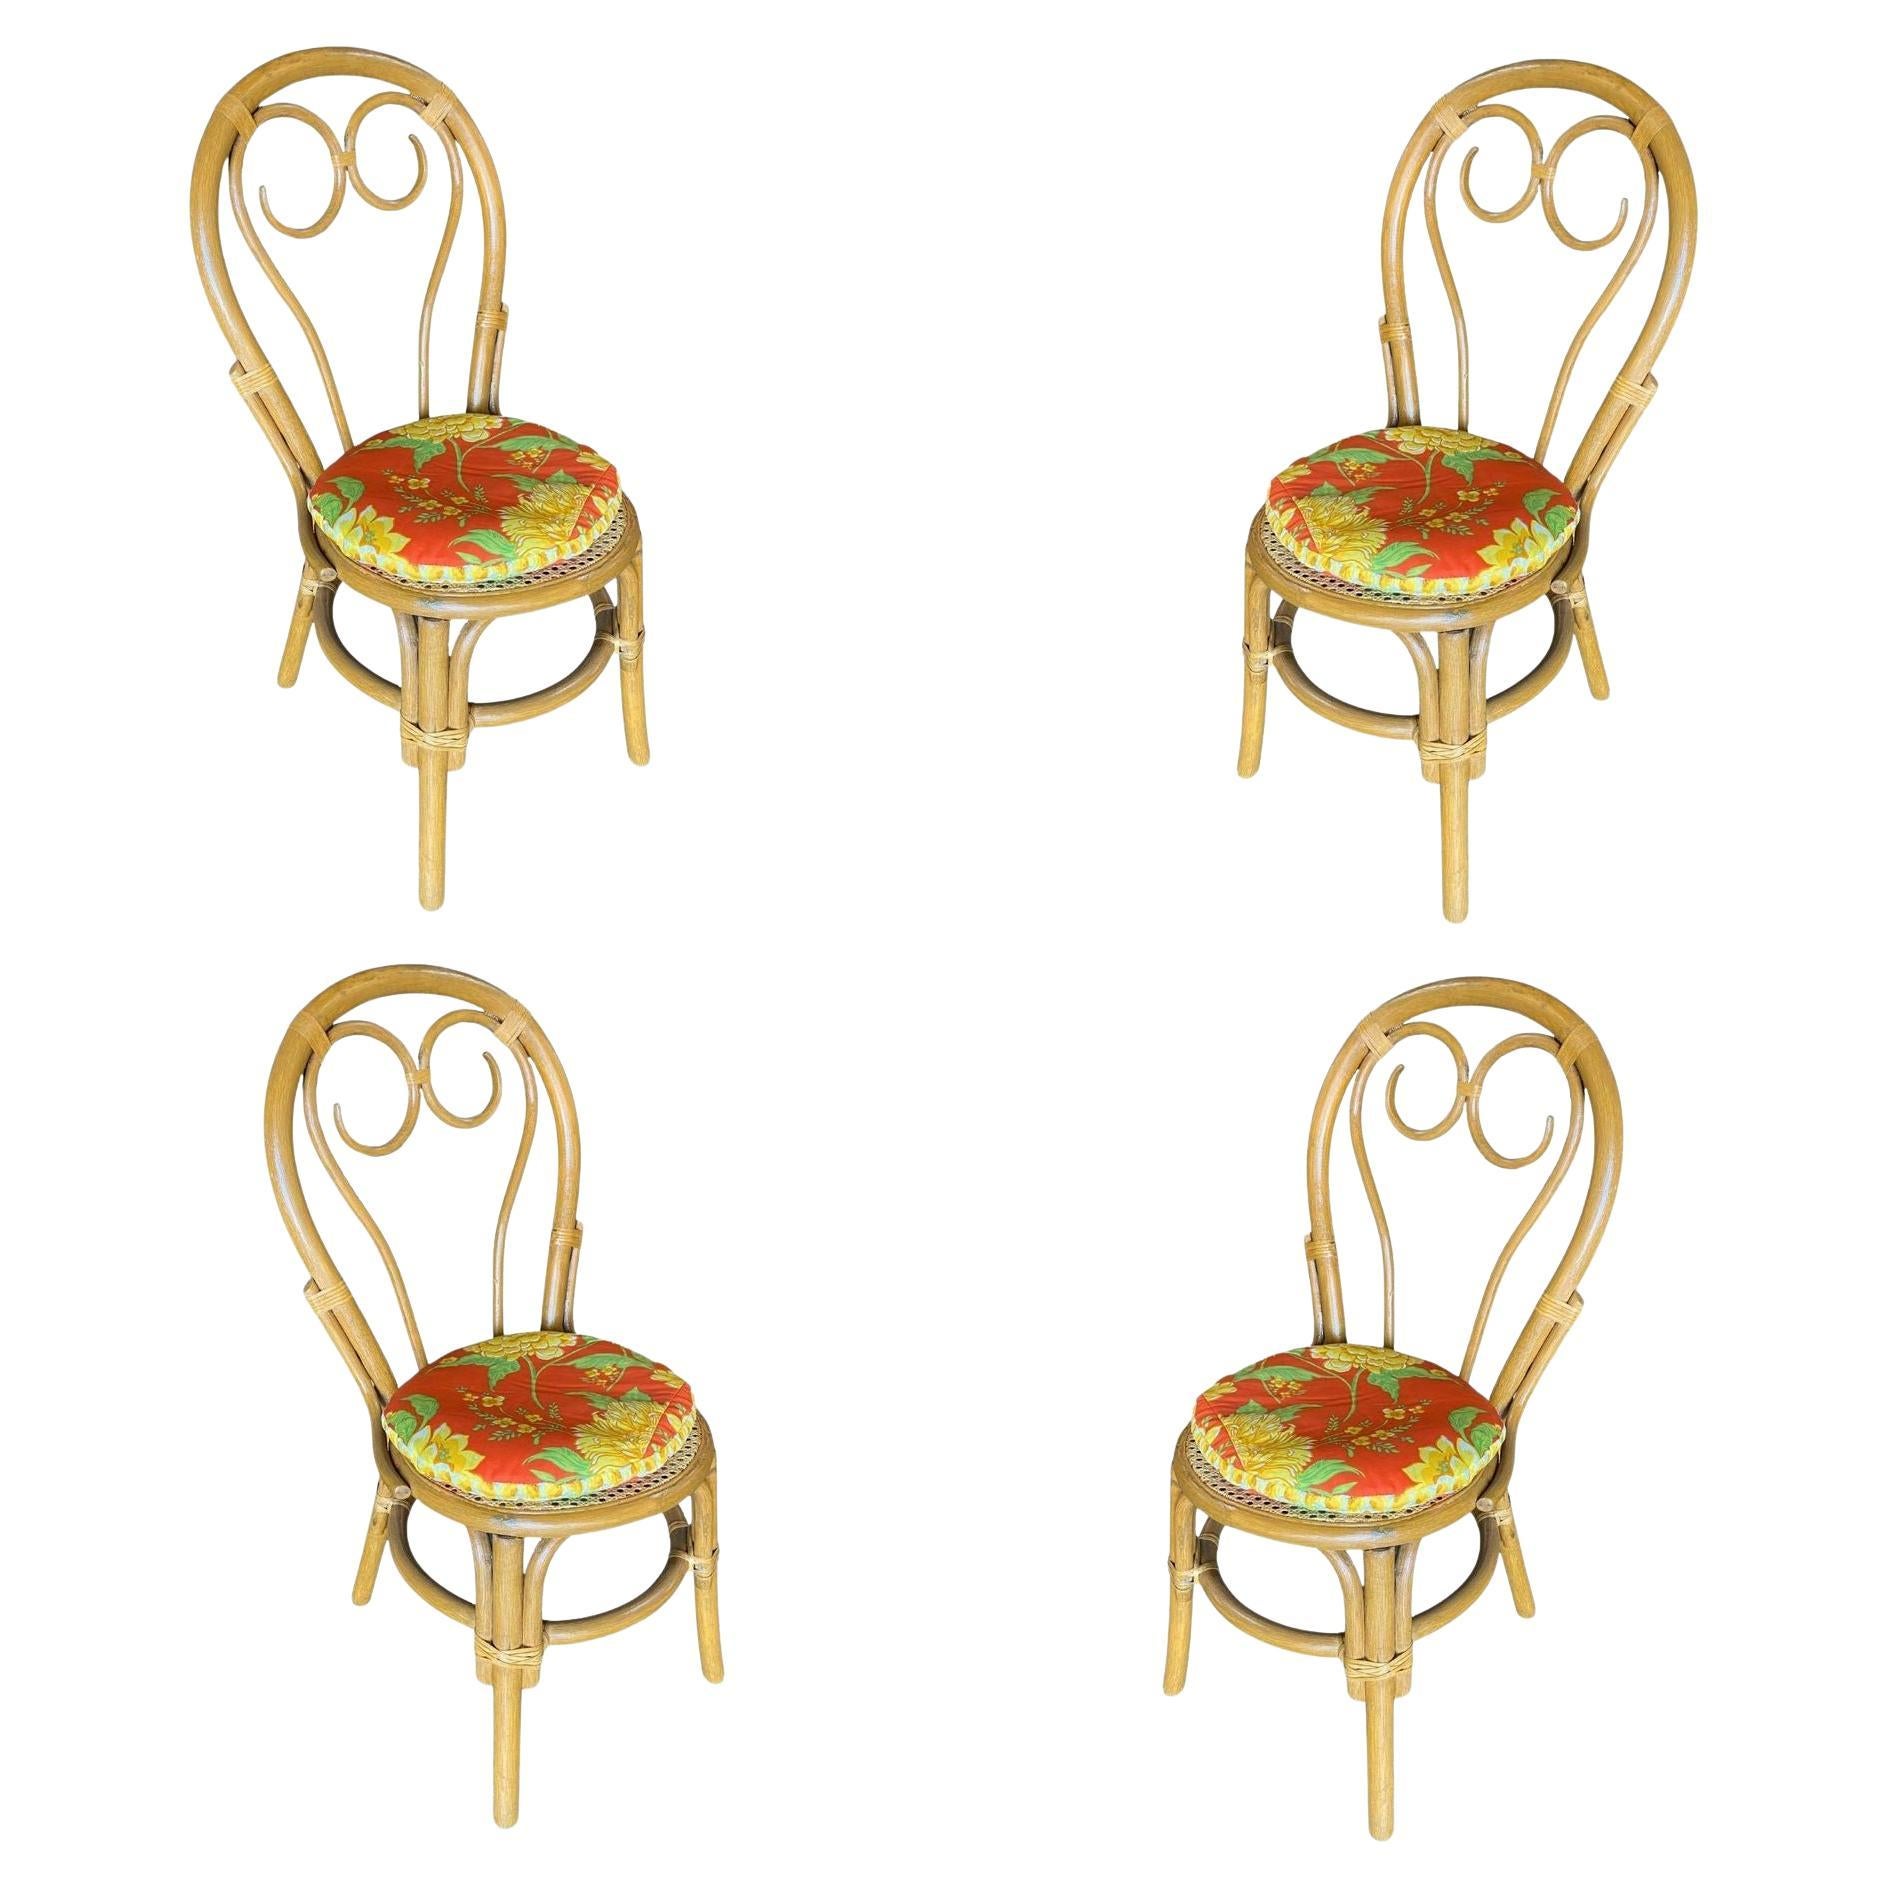 Restored Rattan Dining Chairs with Scrolling Back, Set of 4 For Sale